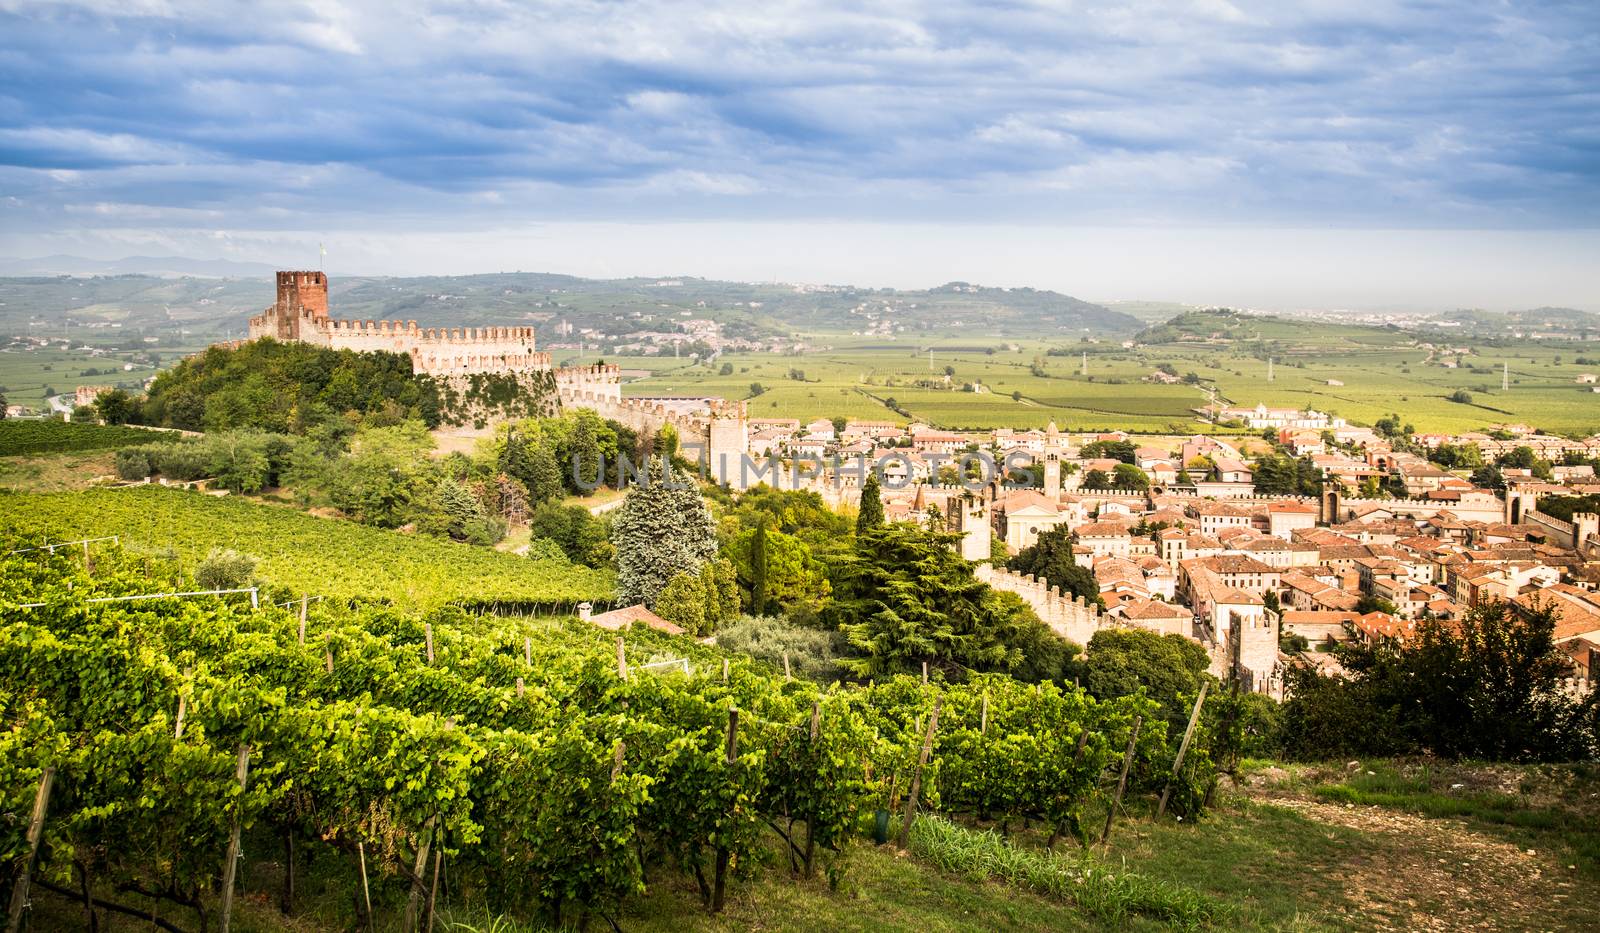 view of Soave (Italy) and its famous medieval castle by Isaac74